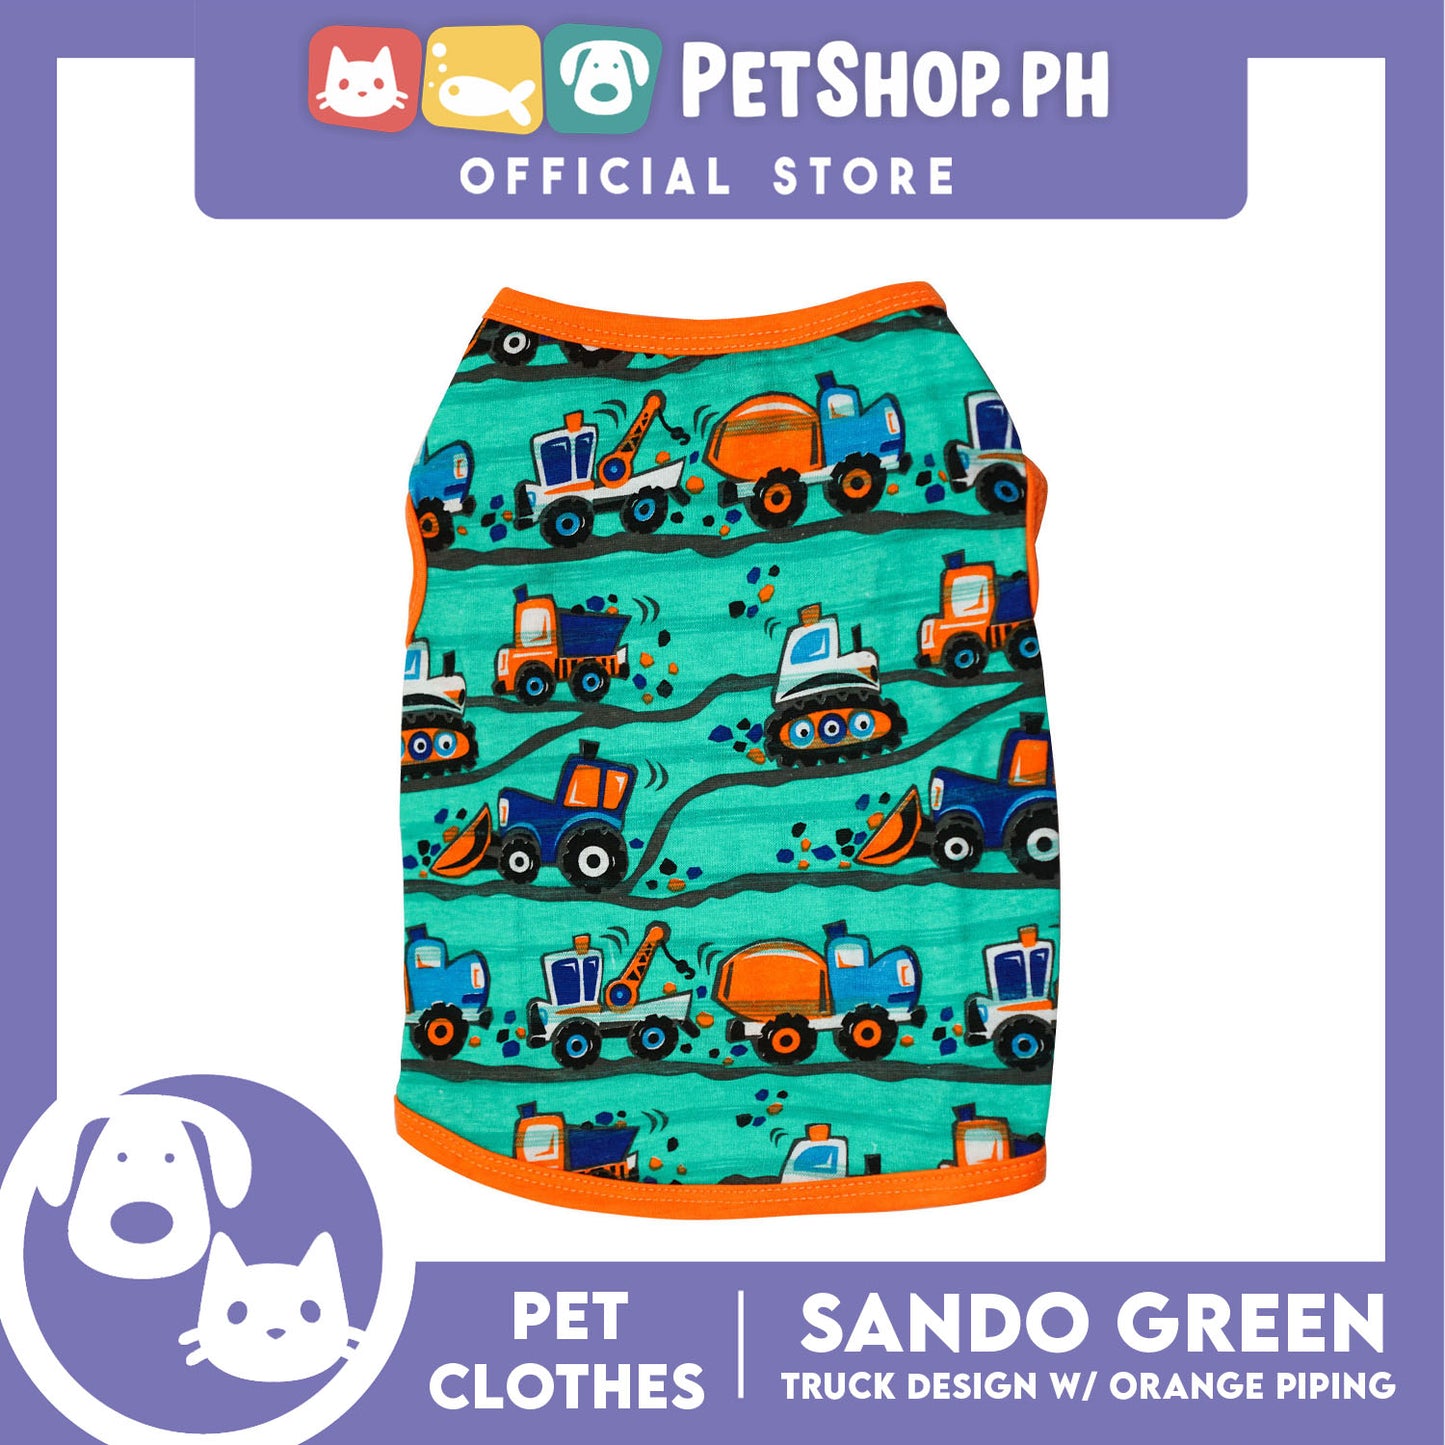 Green Pet Sando with Truck Design with Orange Piping Sleeveless (Medium) for Puppy, Small Dogs